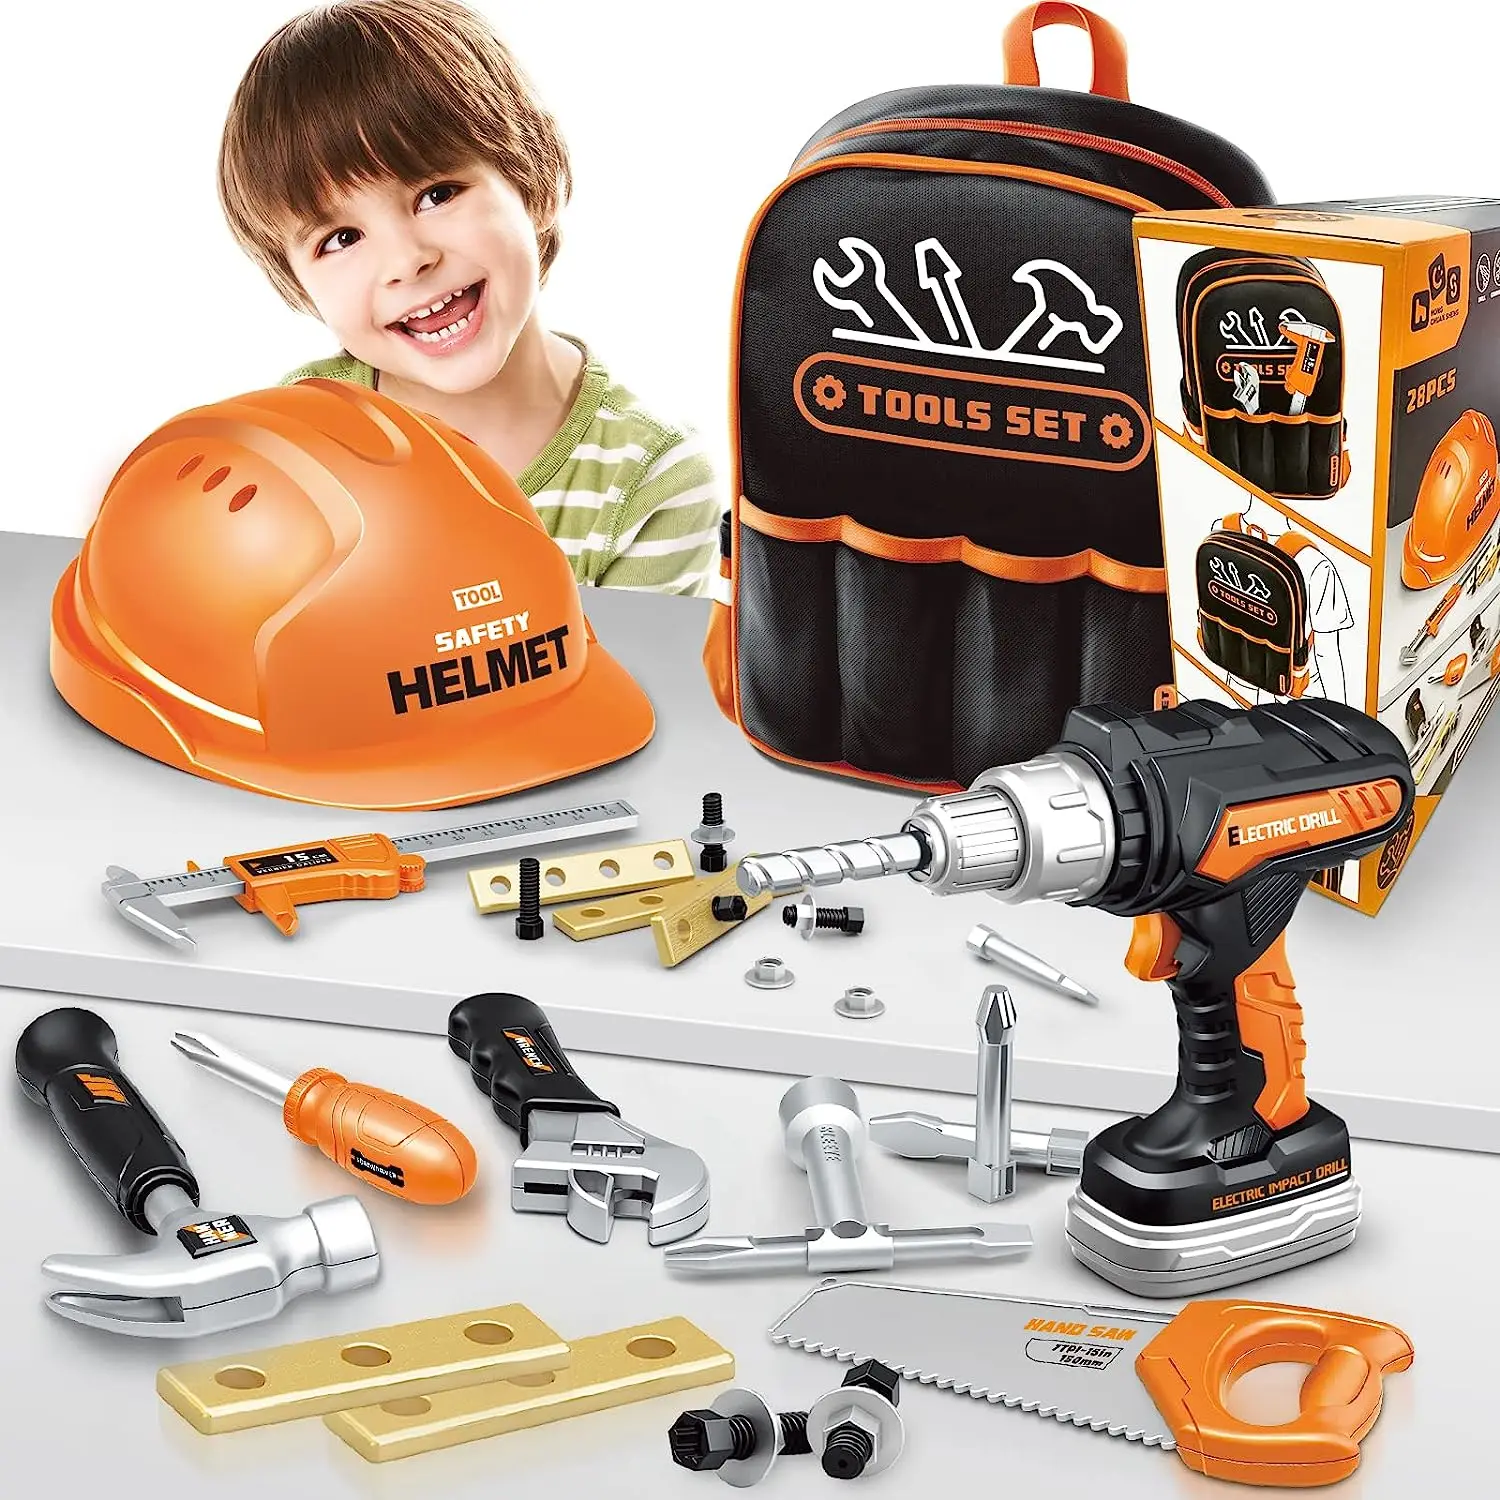 https://ae01.alicdn.com/kf/S8fb521592b1a454aaa3fc733b9d7c219k/Children-s-Tool-Toy-Set-Drill-Toy-Tool-Bag-Cordless-Screwdriver-Tool-Box-Filled-with-Toy.jpg